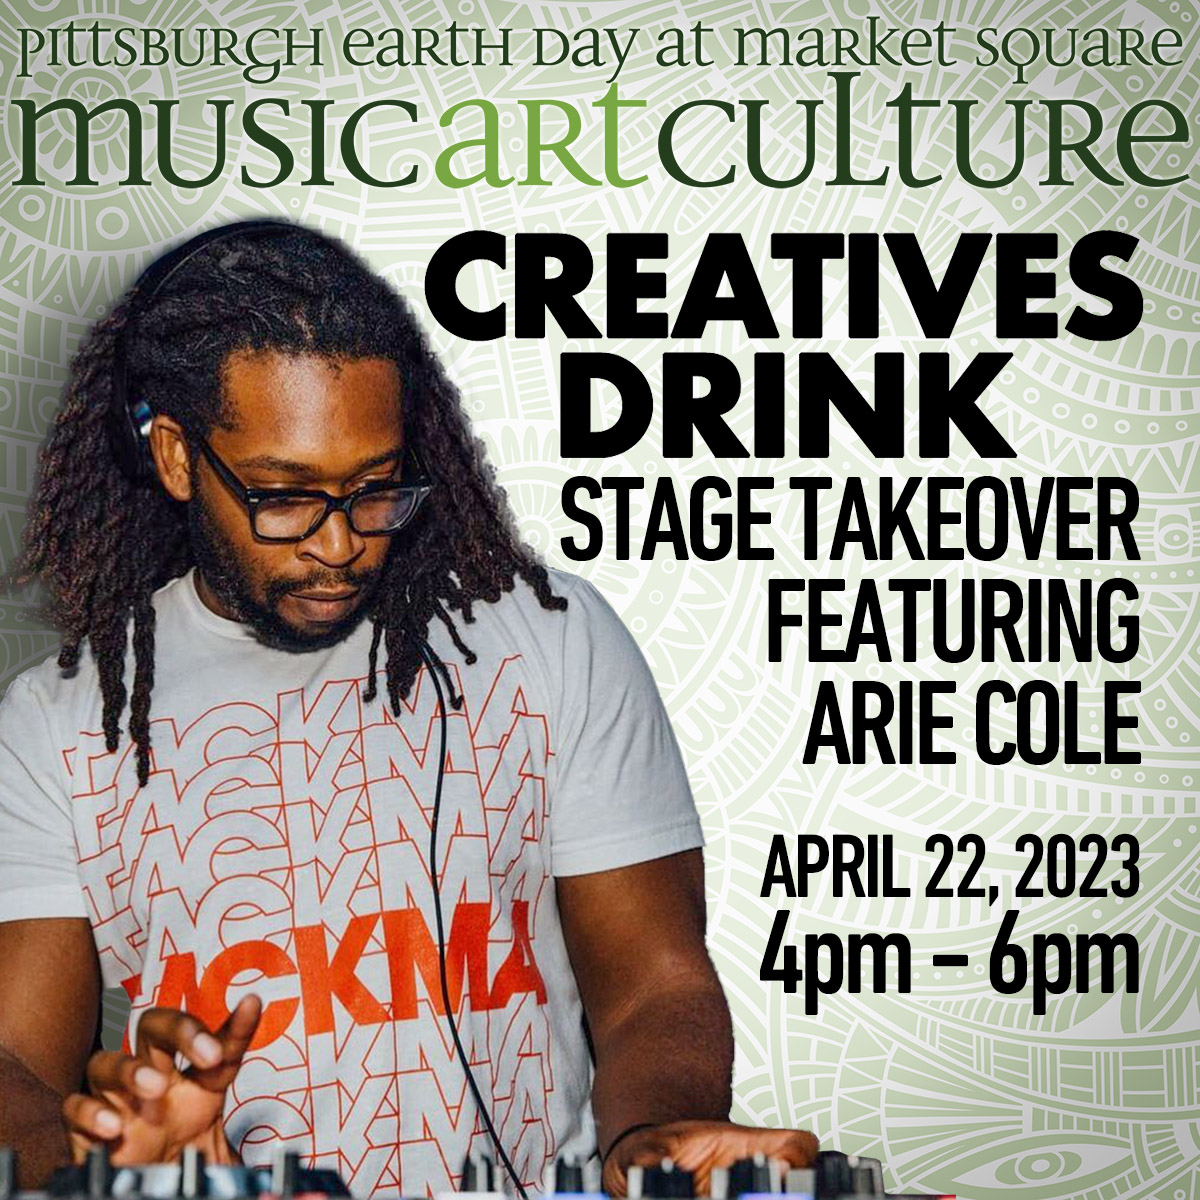 DJ Arie Cole and Creatives Drink stage takeover, Music, Art, and Culture Festival , Pittsburgh Earth Day